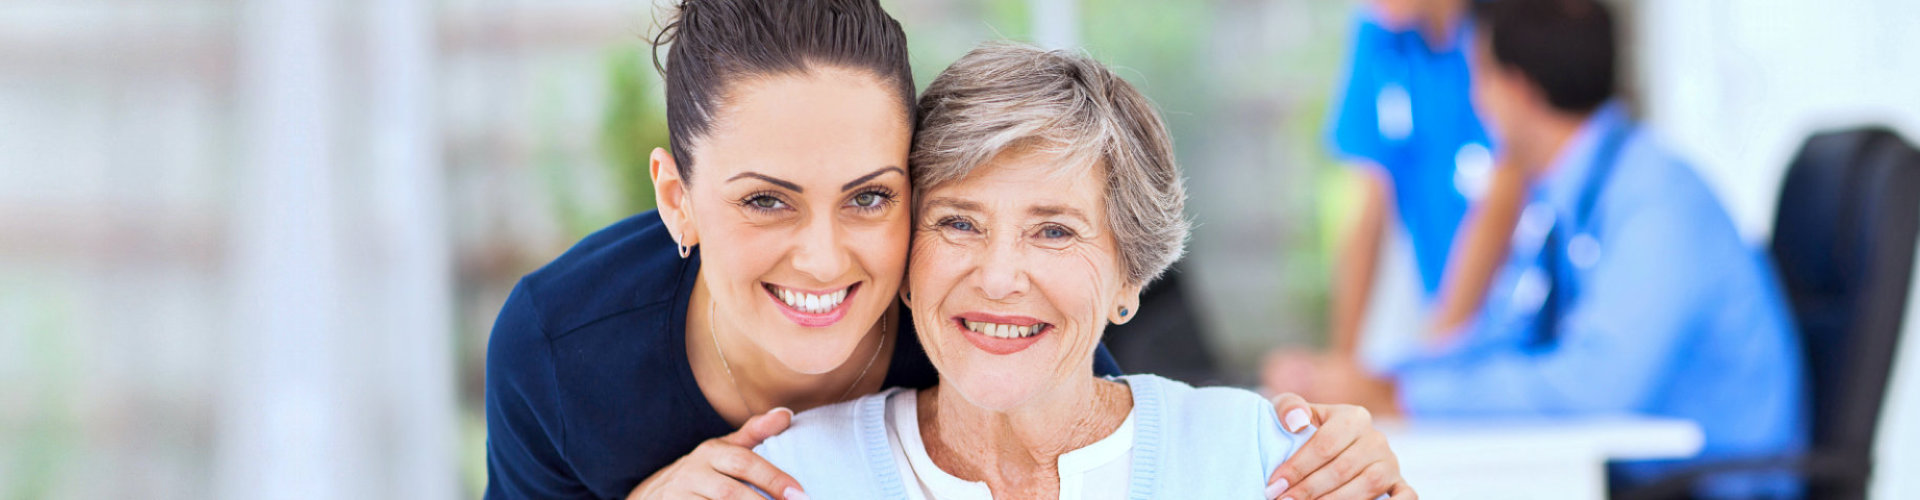 caregiver and senior woman are smiling